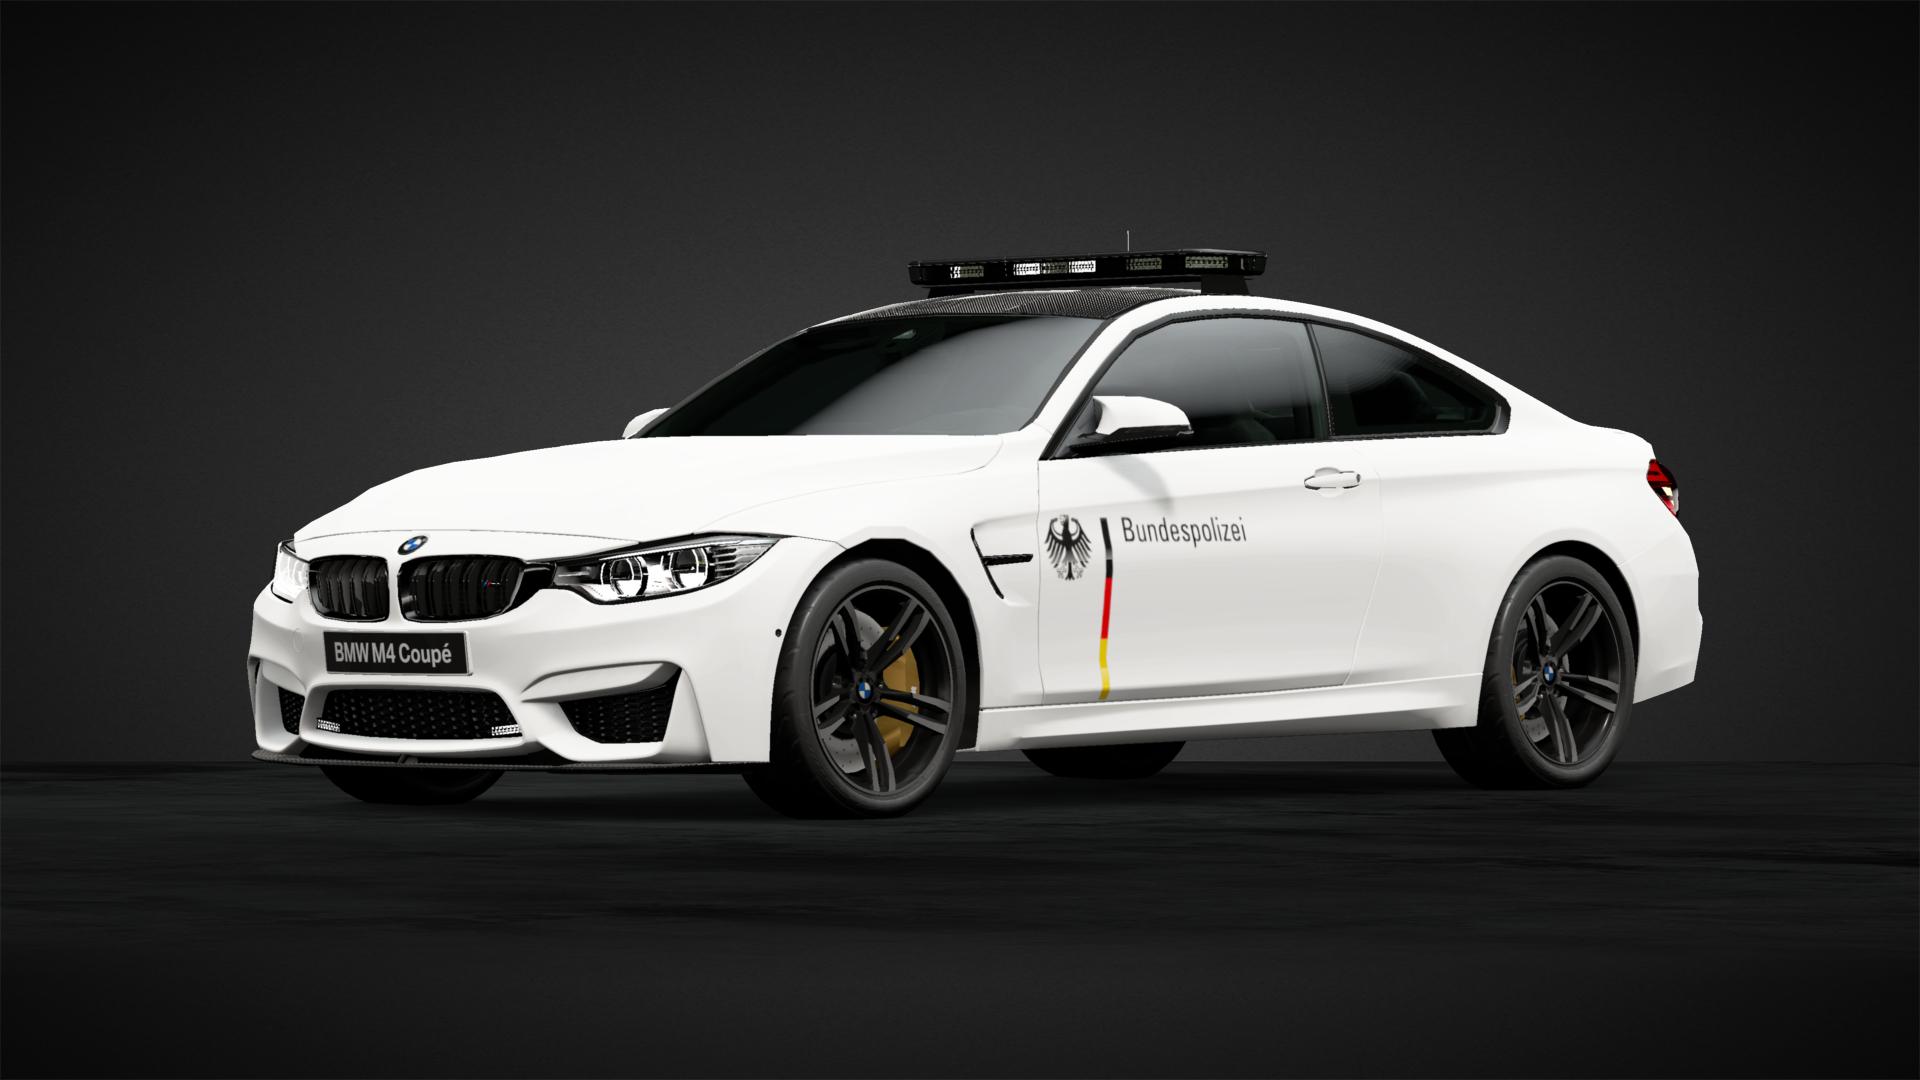 Bmw M4 Police Car Uk , HD Wallpaper & Backgrounds